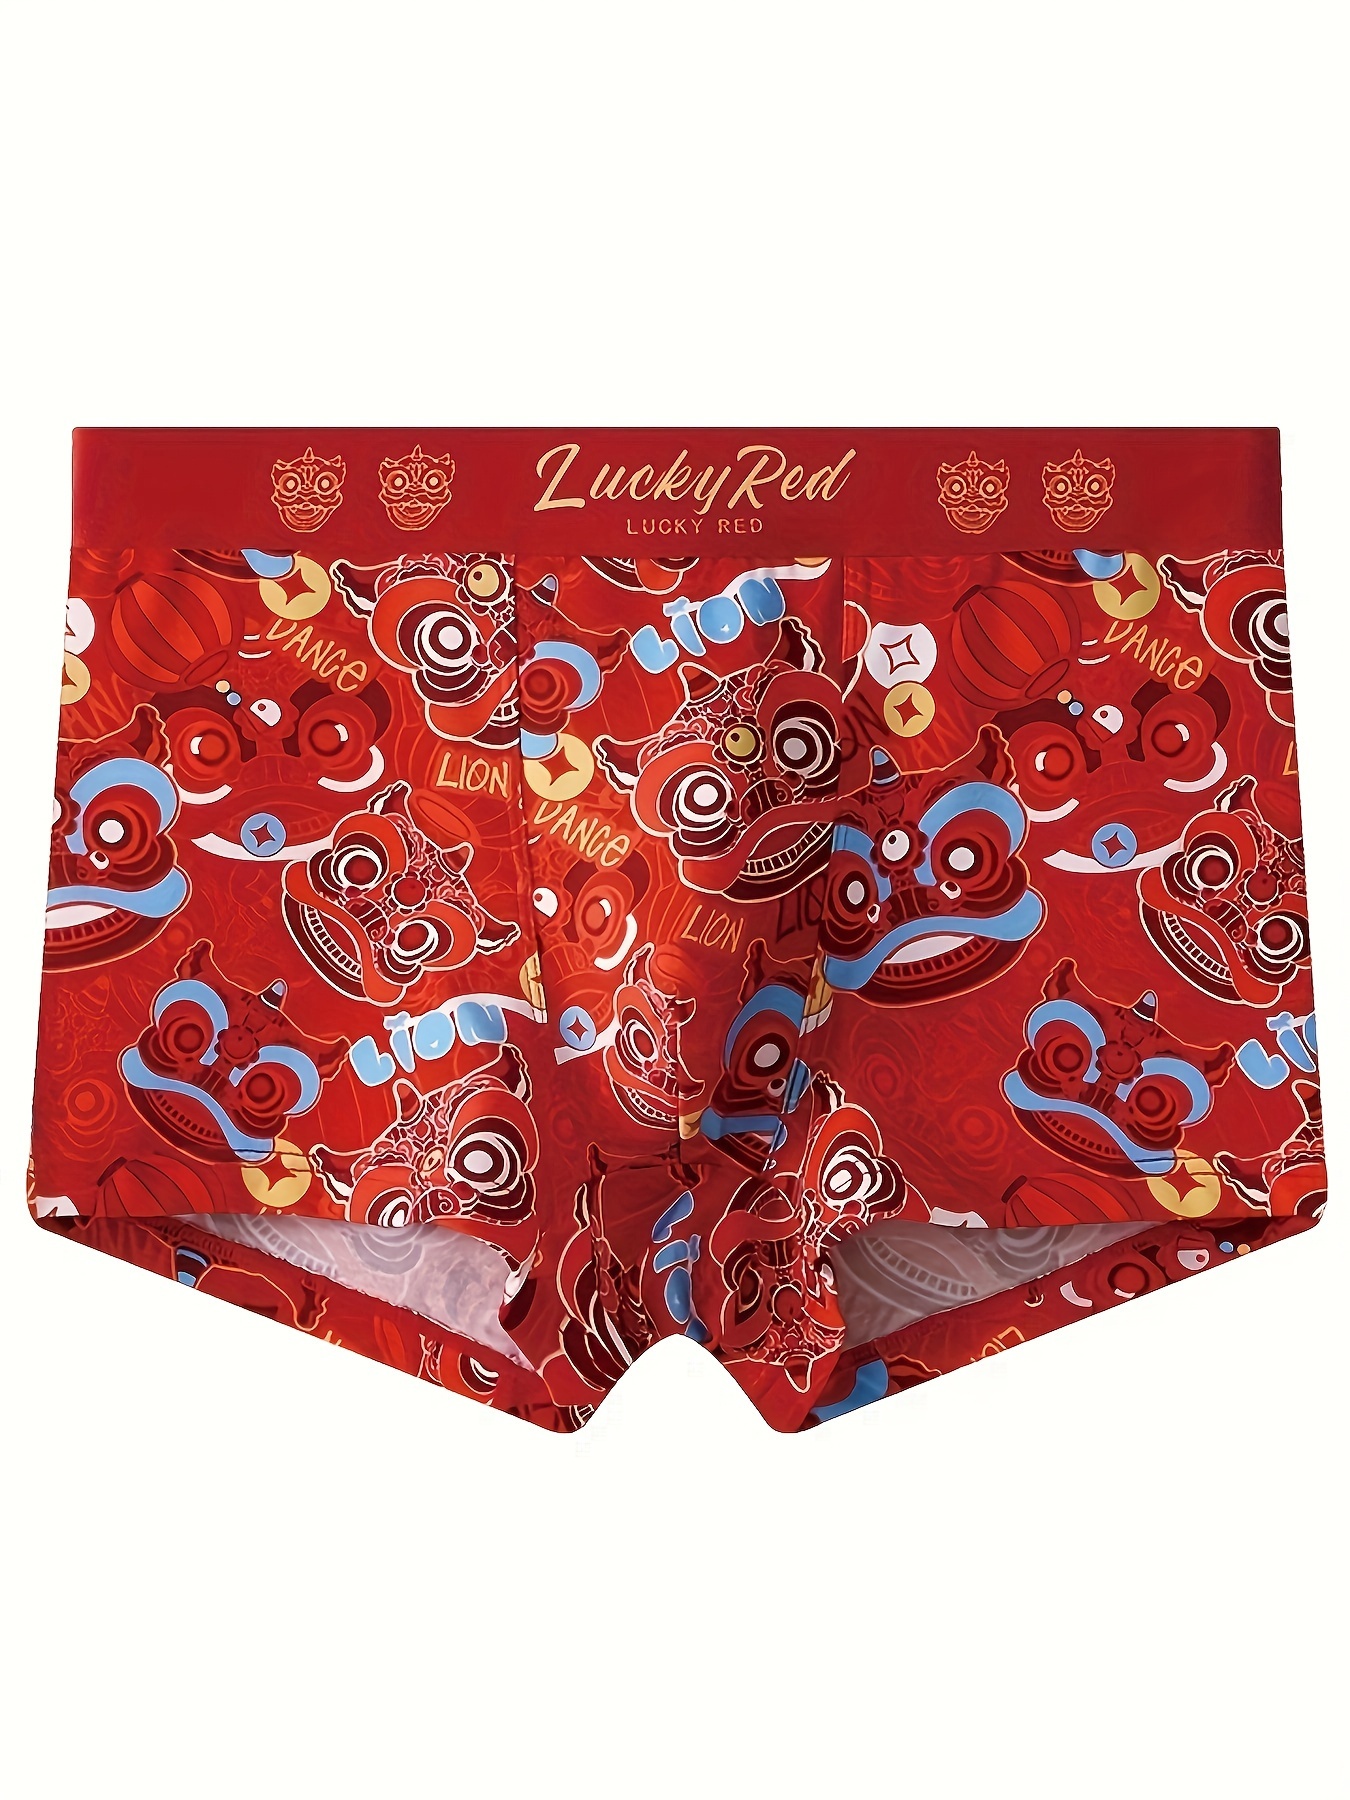 wirlsweal Men Boxers New Year Style Good Fortune Mid Waist Red Festive  Chinese Print Soft Breathable Good Elasticity Men Underpants Underwear